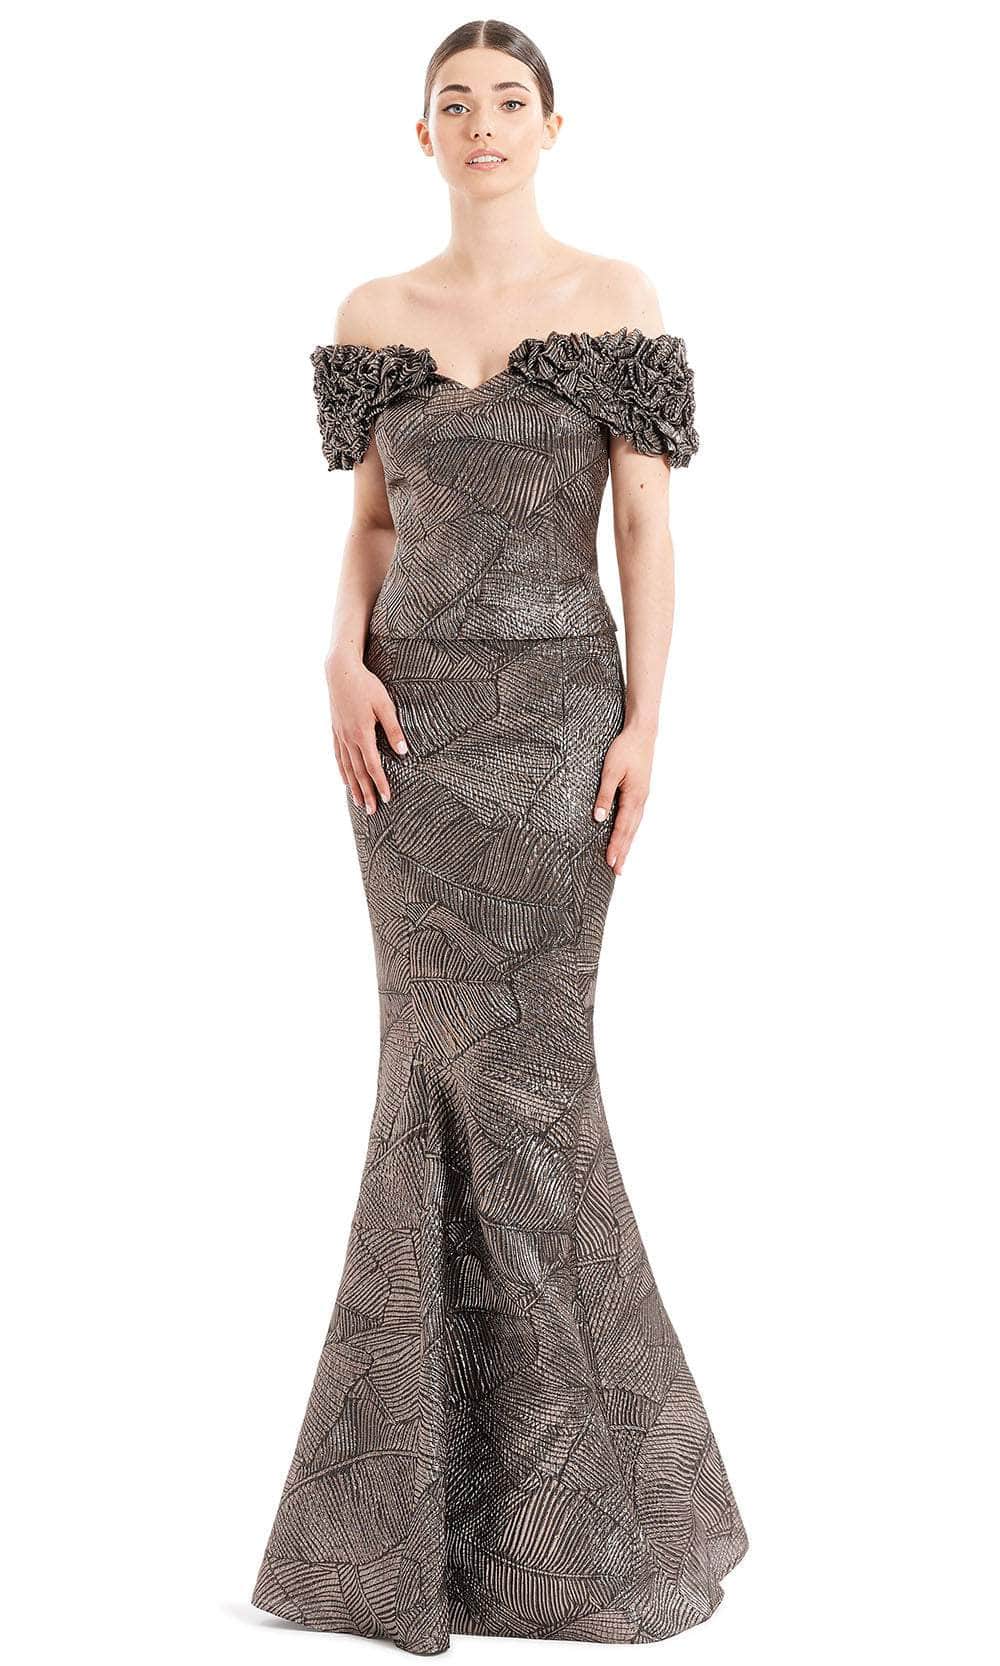 Alexander By Daymor 1650F22 - Ruffled Sleeve Metallic Evening Gown Special Occasion Dress 4 / Mocha